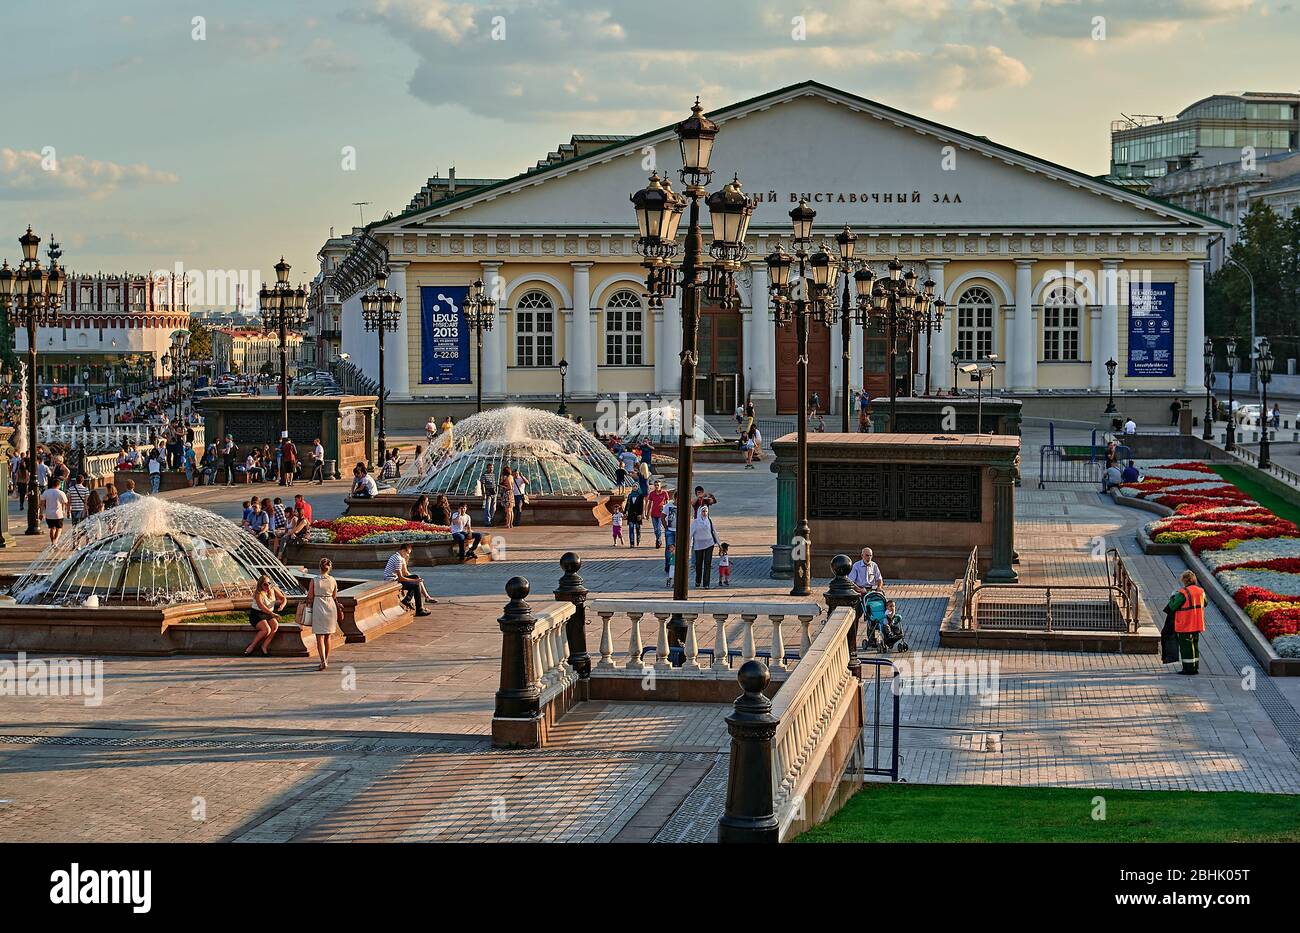 Moscow, Russia, Evening, Manezh Square, view of the Central Exhibition Hall - Manezh, landmark Stock Photo